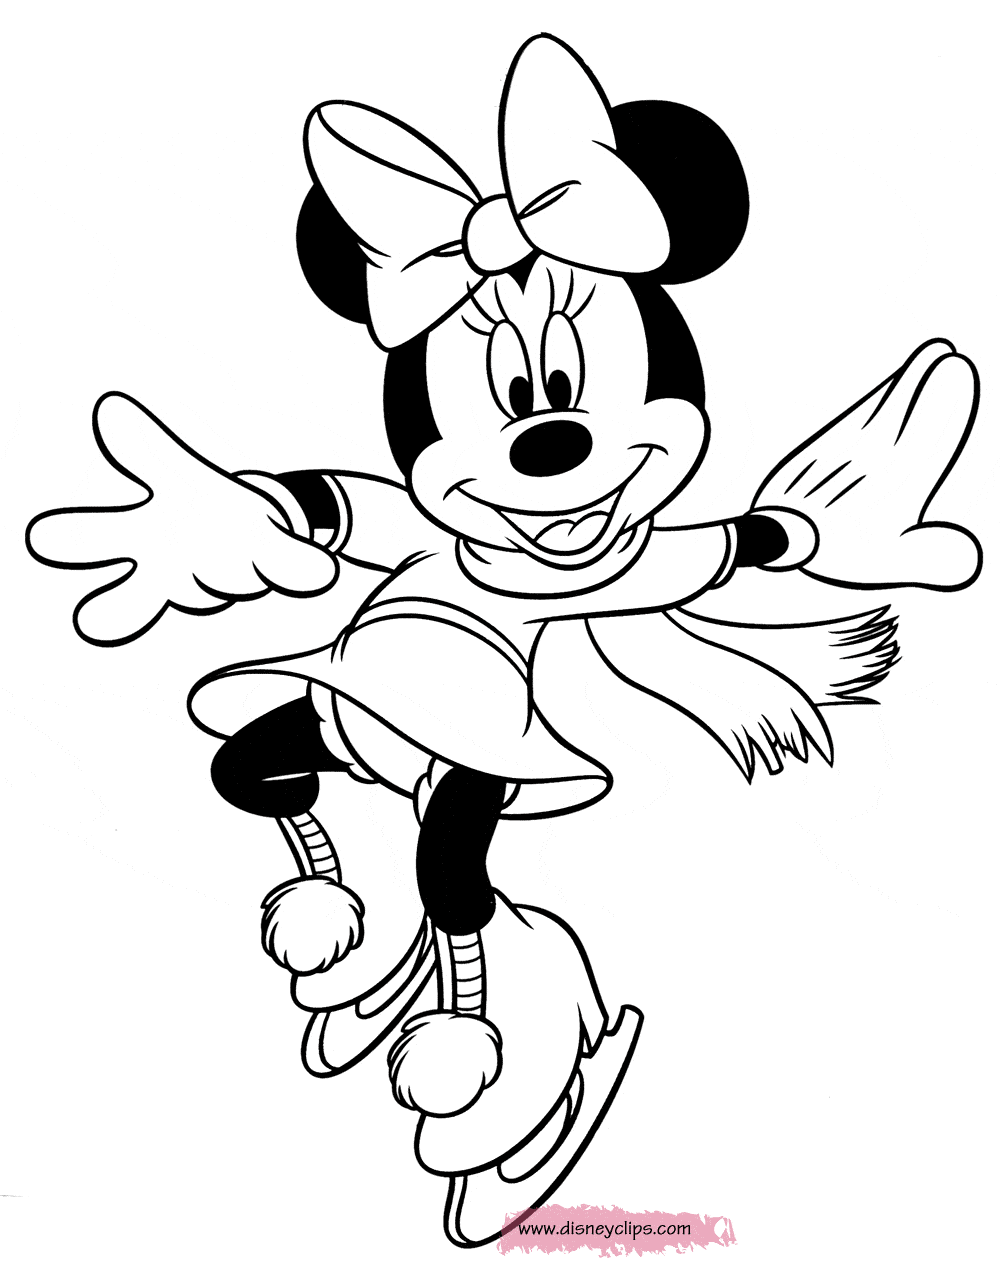 Minnie Mouse Coloring Pages 6 | Disney Coloring Book